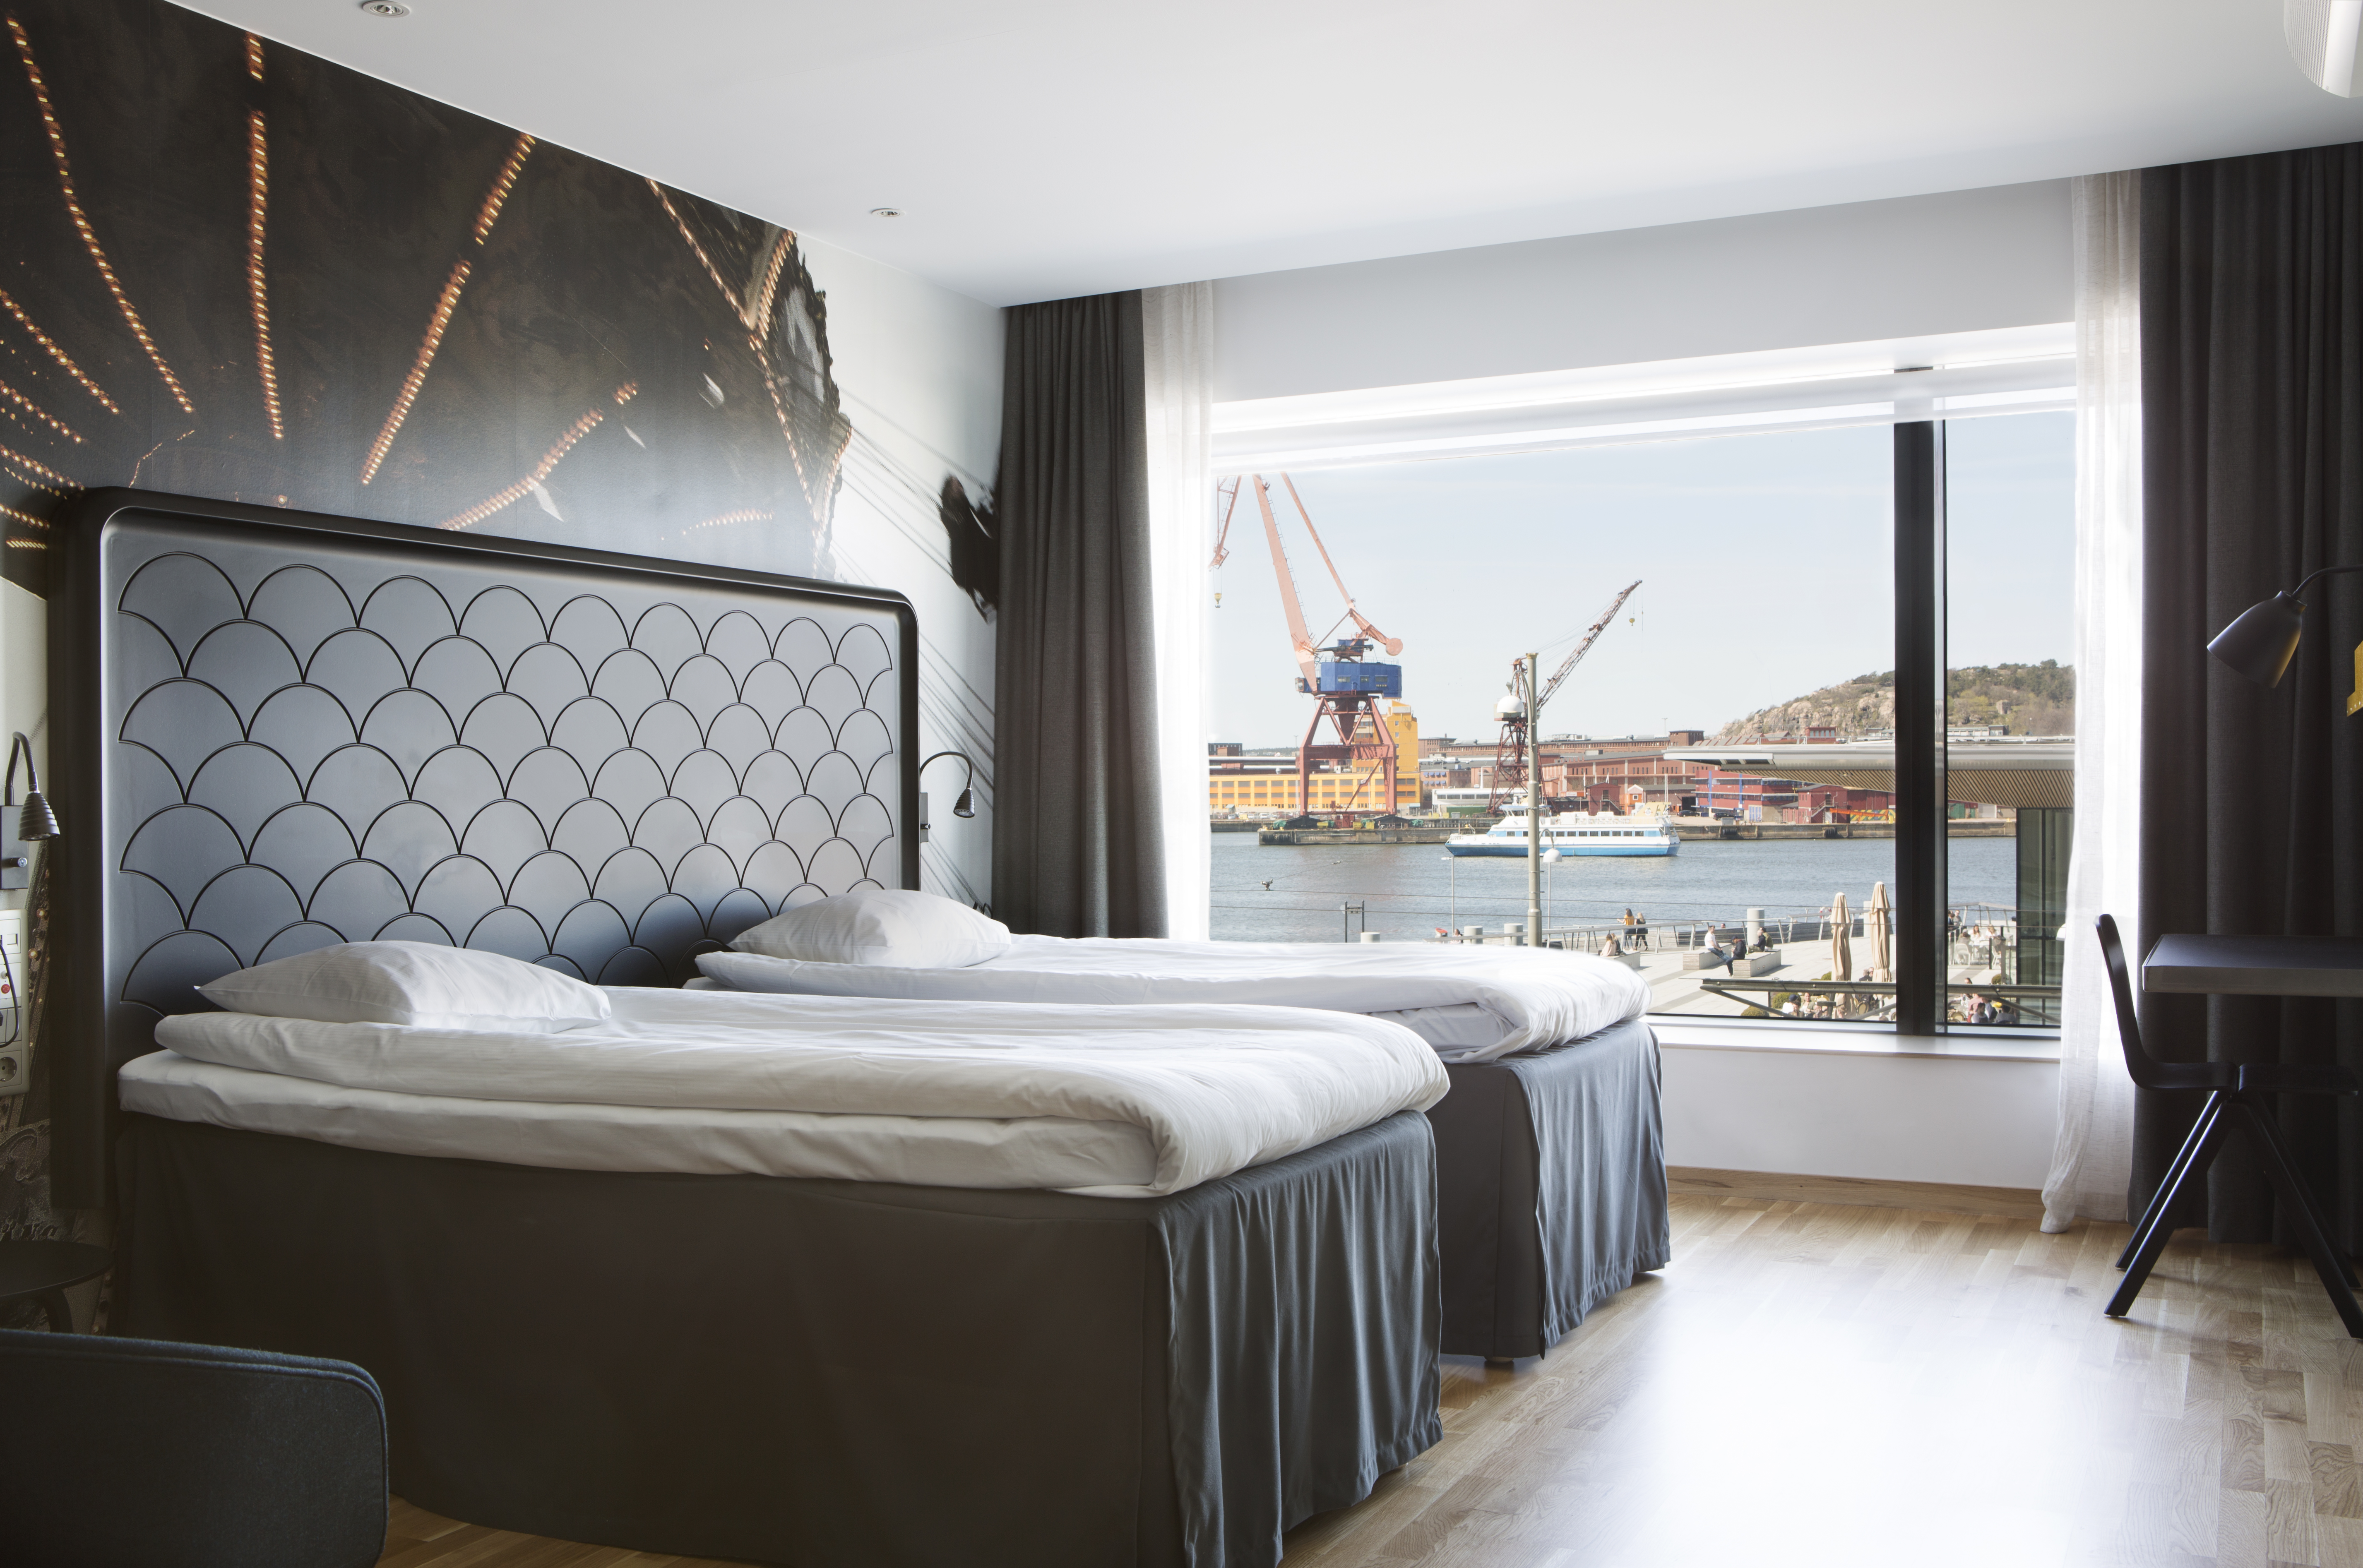 Comfort Hotel Göteborg <br/>117.53 ew <br/> <a href='http://vakantieoplossing.nl/outpage/?id=cd603850f3b917a3d661a7a7c1e78a0a' target='_blank'>View Details</a>